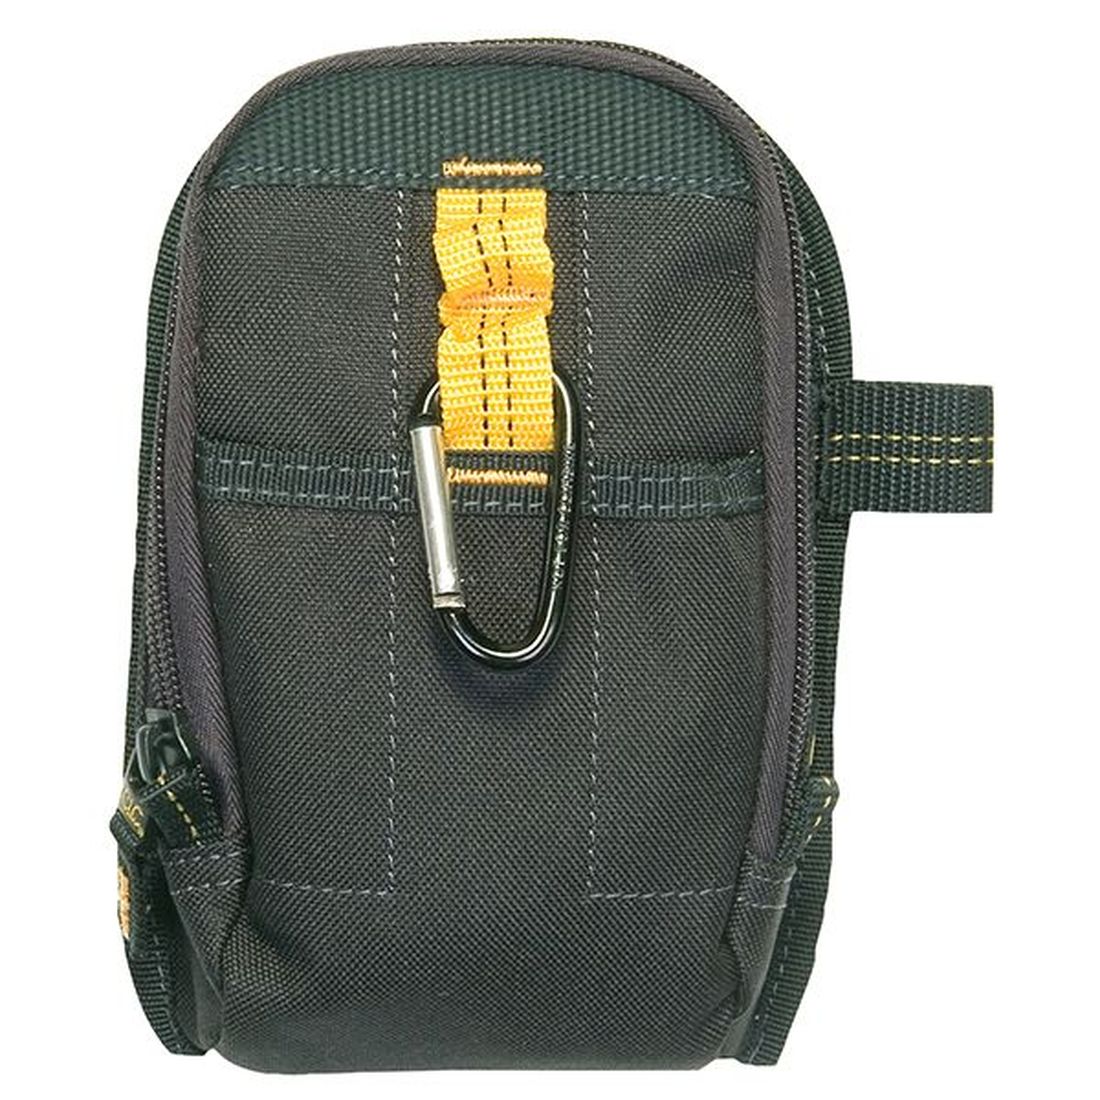 Kuny's SW-1504 Carry All Tool Pouch 9 Pocket                                           